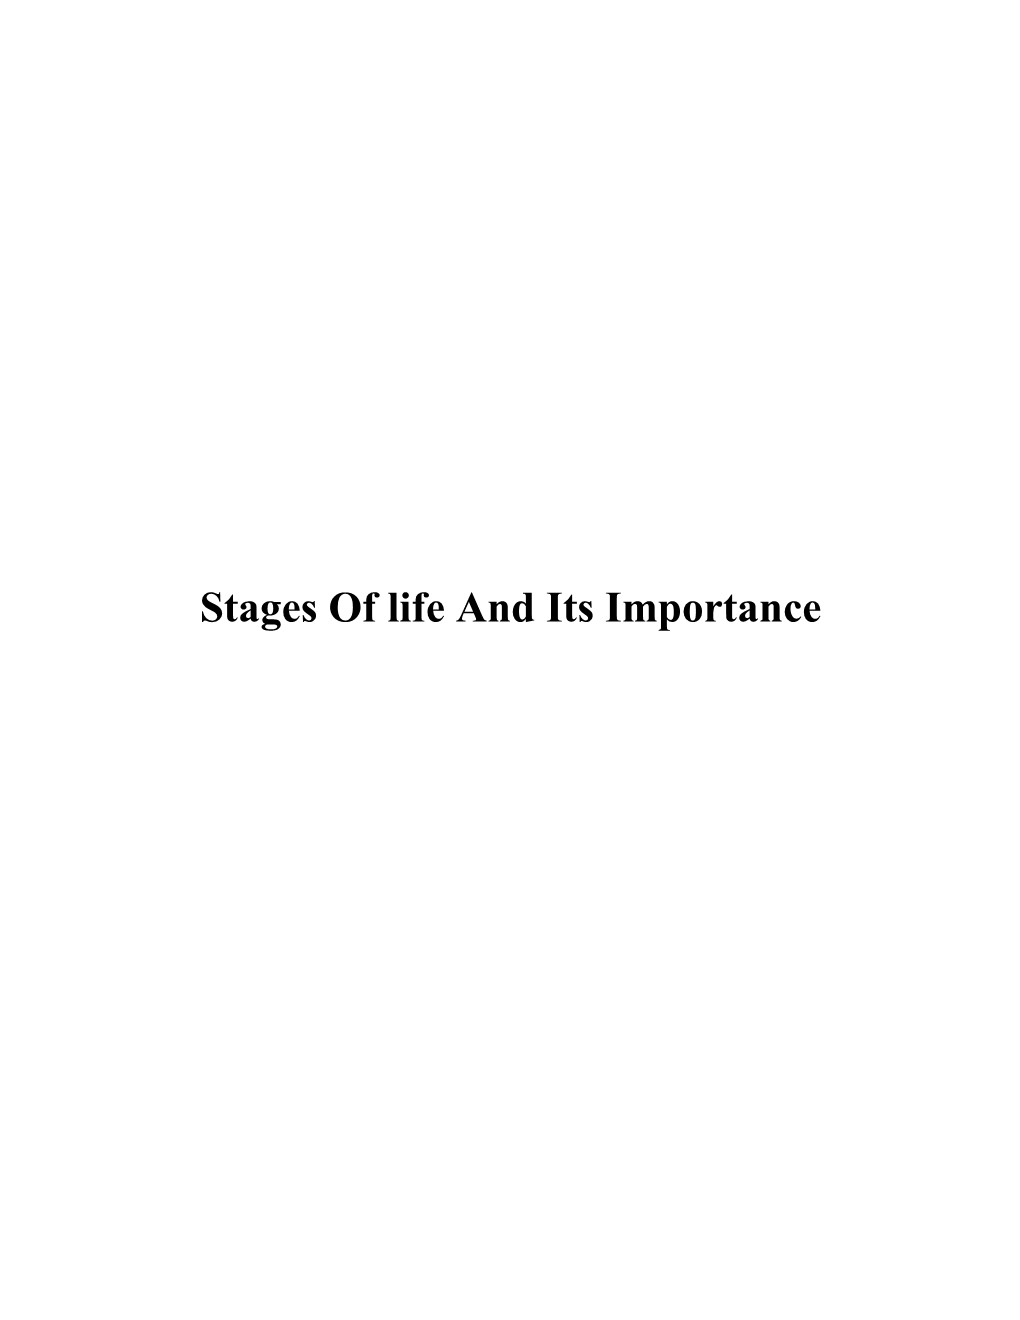 Stages of Life and Its Importance